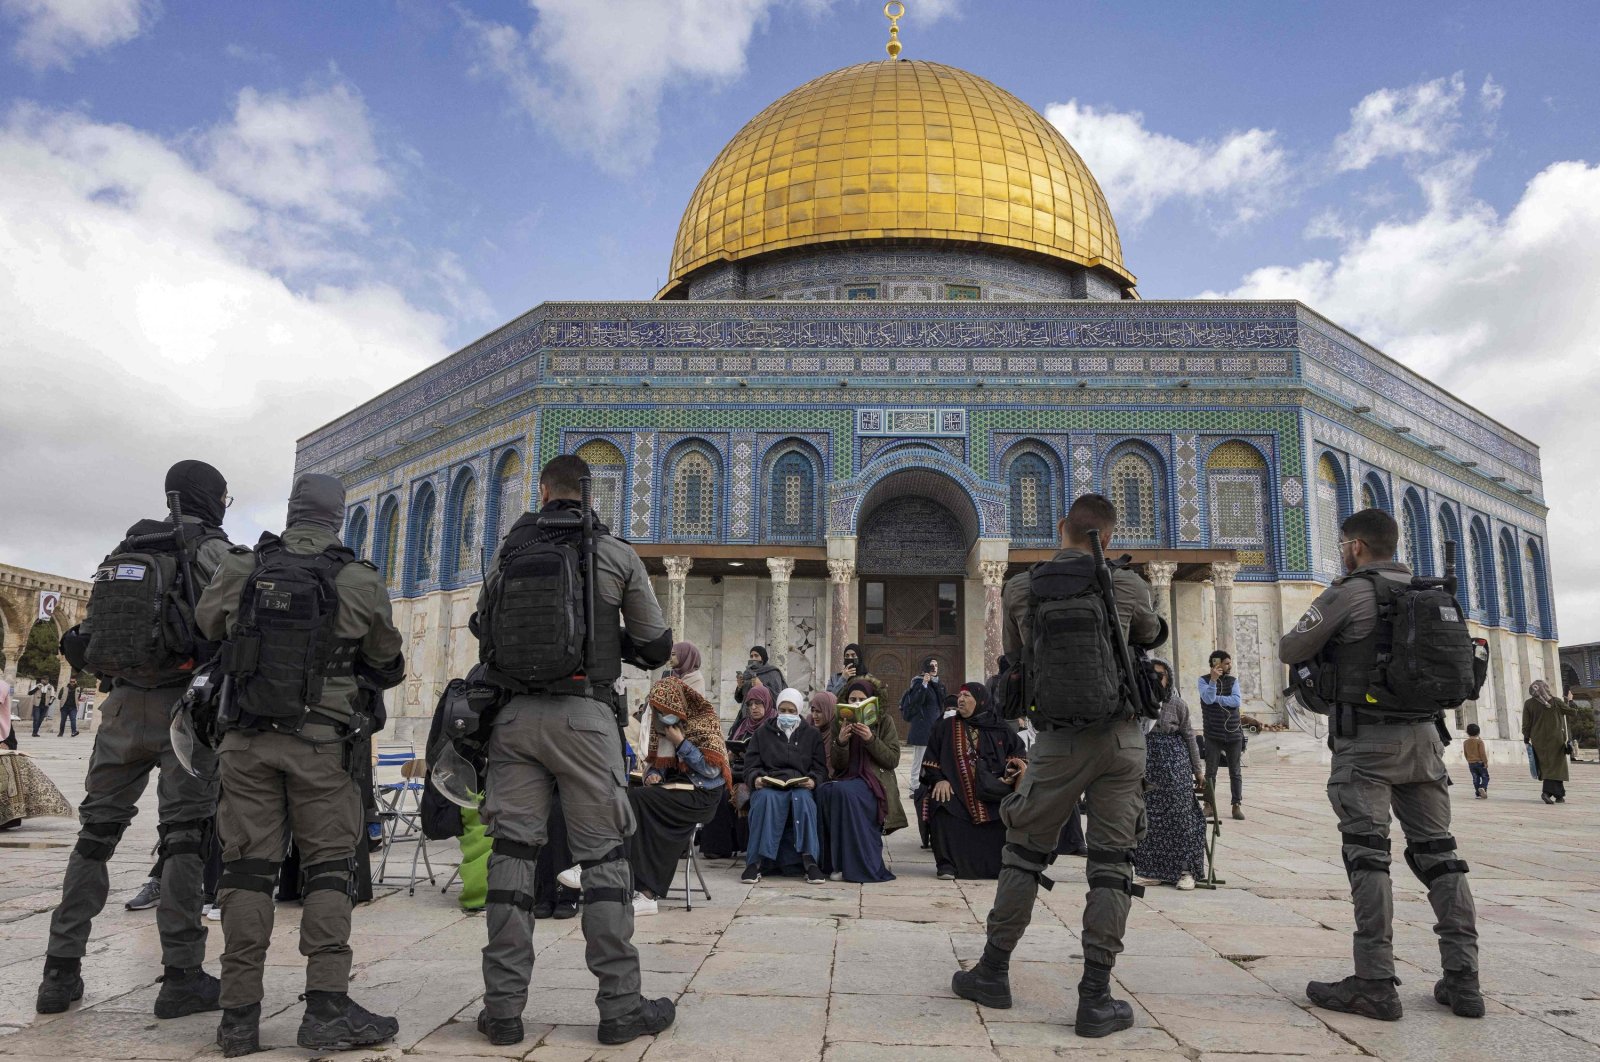 Israeli police stand in front of Muslim women praying in front of the Dome of the Rock as a group of Jewish people visit the Temple Mount at Al-Aqasa Mosque complex in occupied East Jerusalem, Palestine, April 20, 2022. (AFP File Photo)